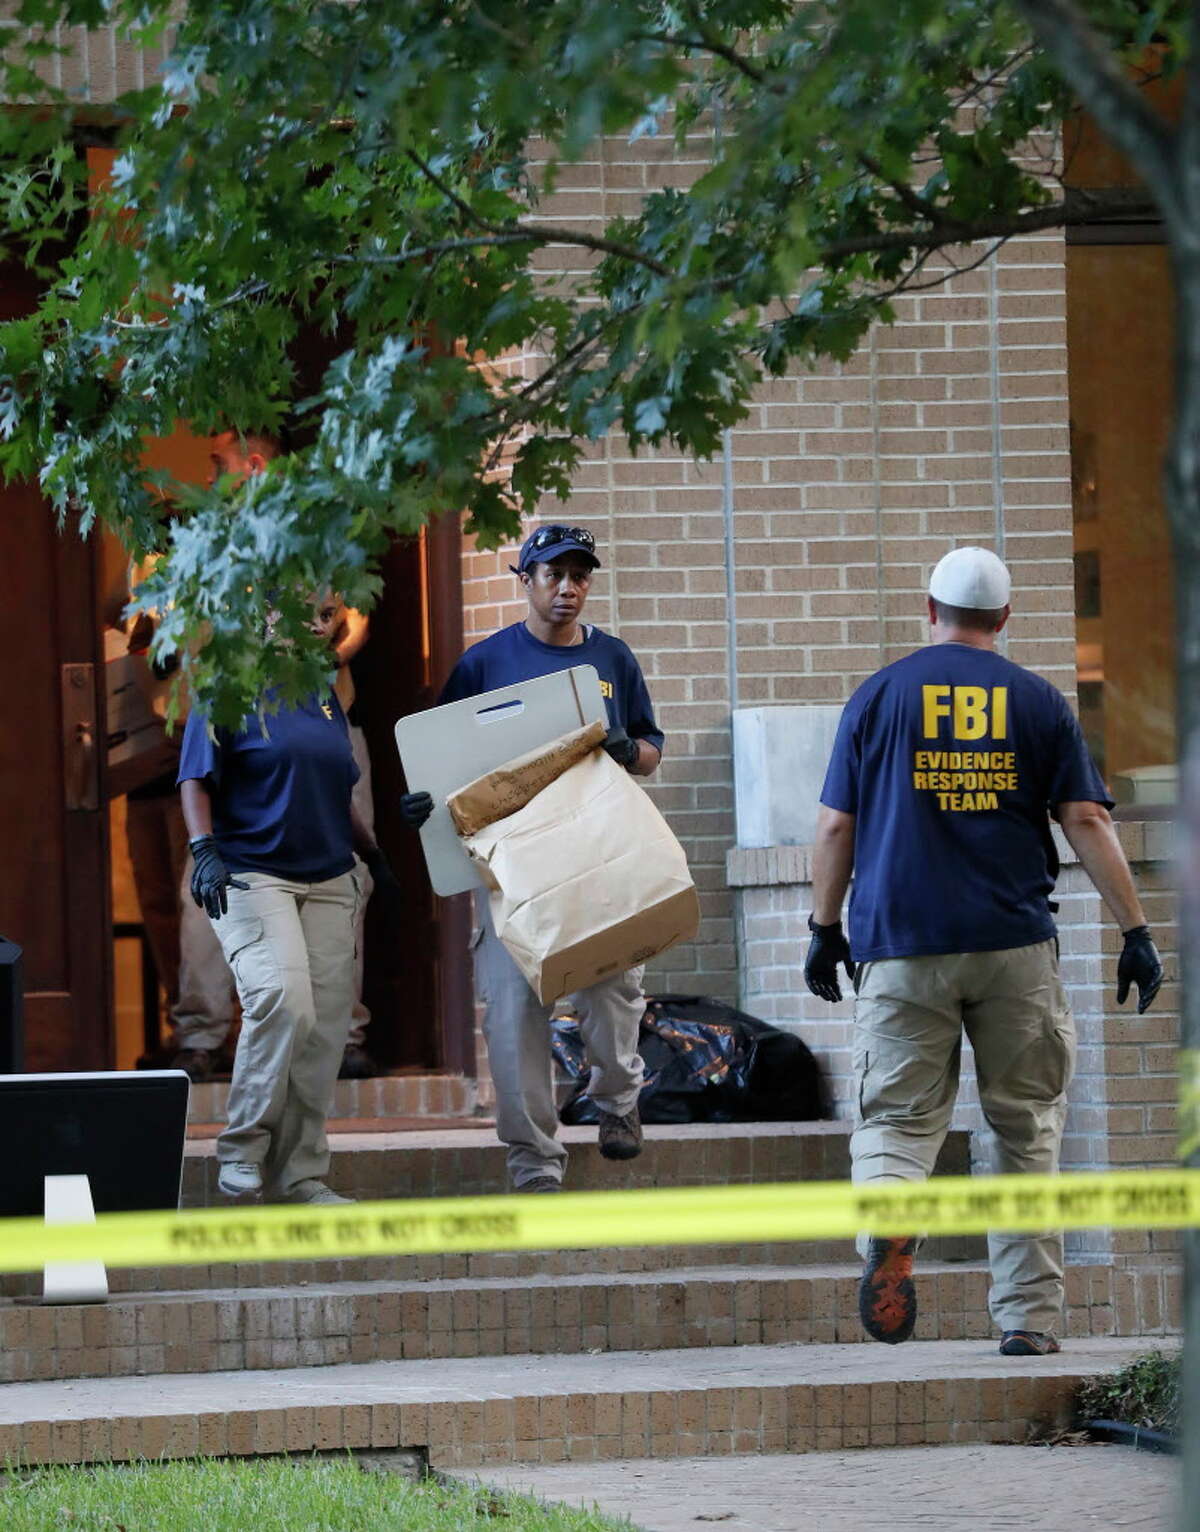 FBI agents take bags of evidence out of a house at 2025 Albans, Monday, Aug. 21, 2017, in Houston. Earlier in the day, the ATF, FBI and Houston Police conducted a controlled explosion at the house next door at 2021 Albans.